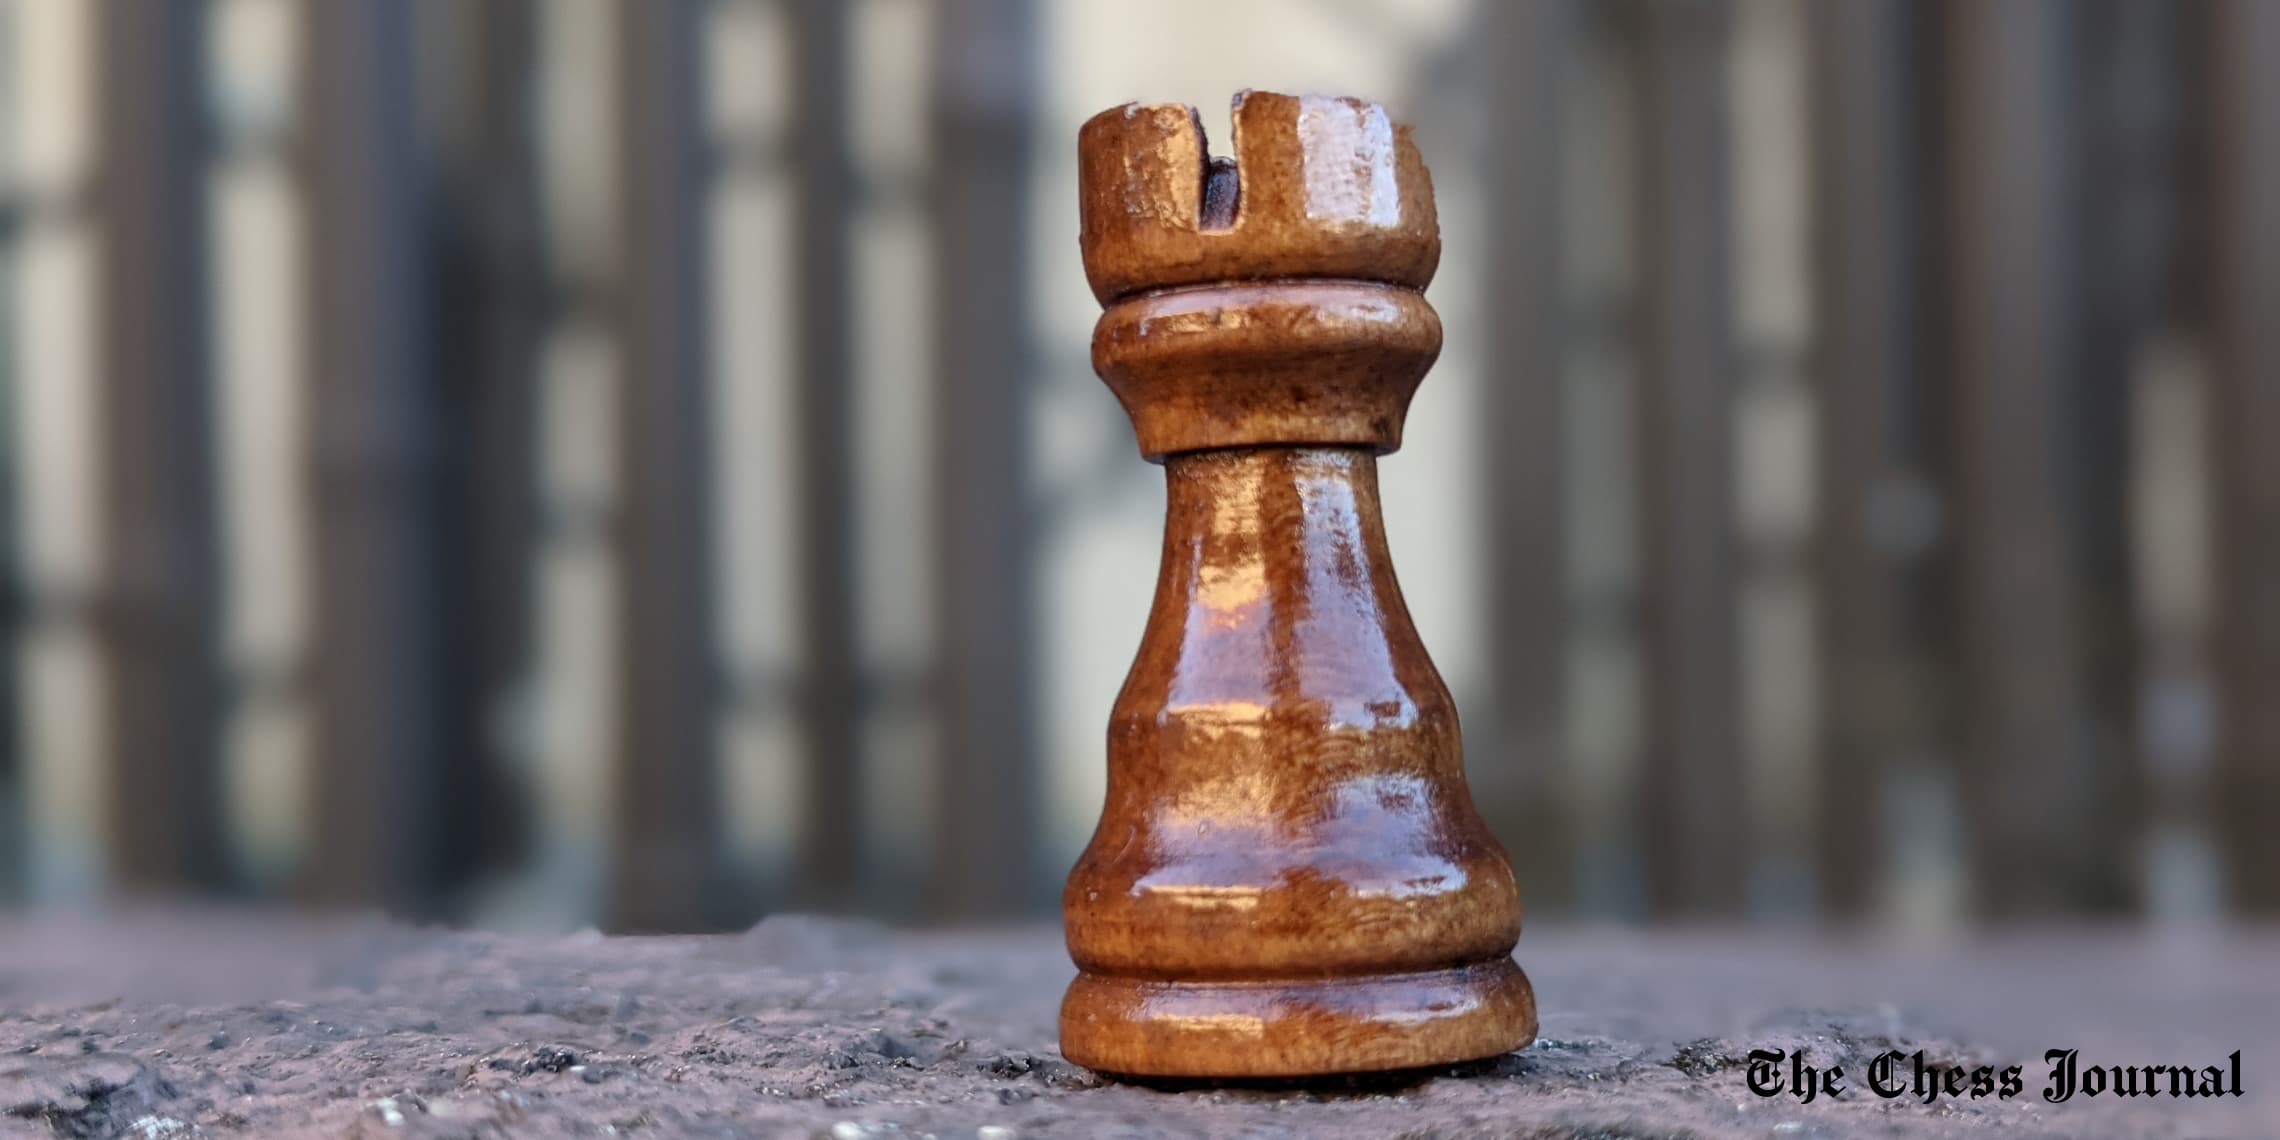 ▷ Rook Chess: 7 tips to Know About this Popular Chess Piece!